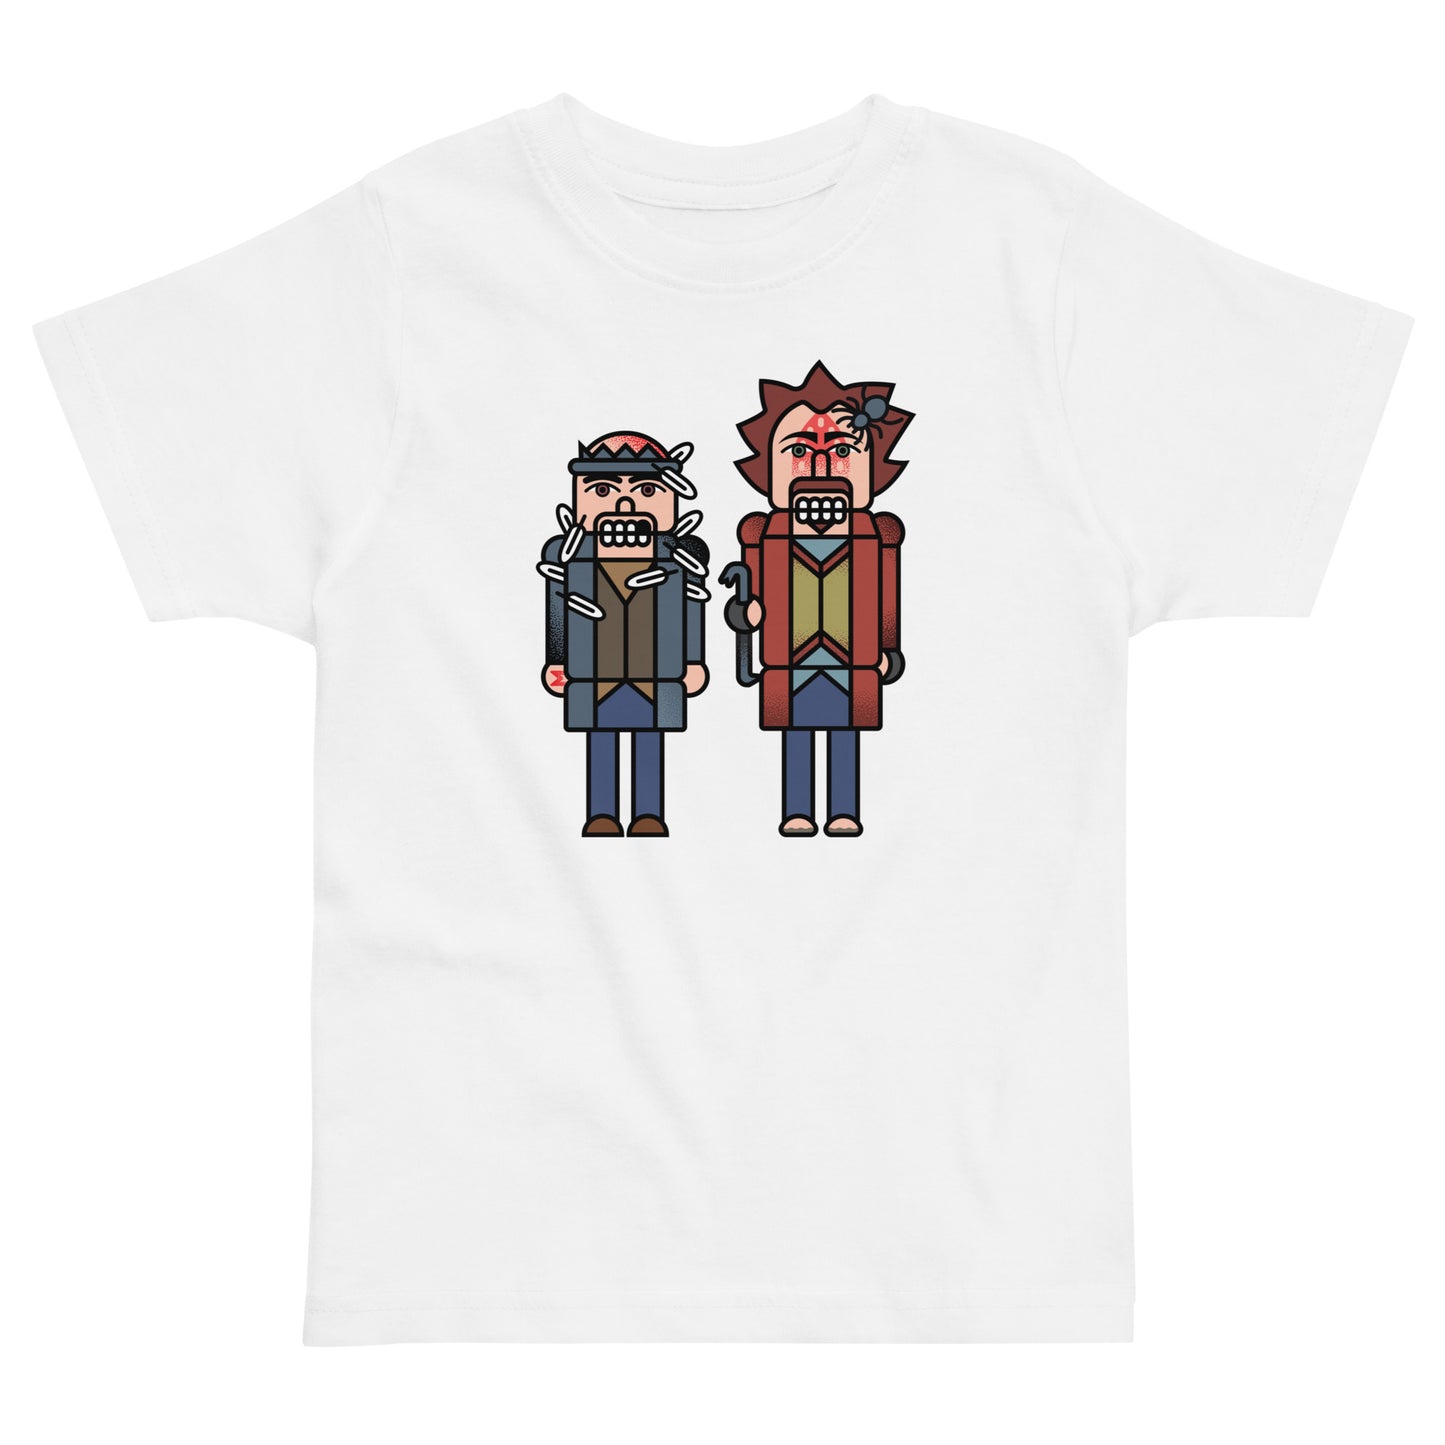 The Nutcrackers Kid's Toddler Tee